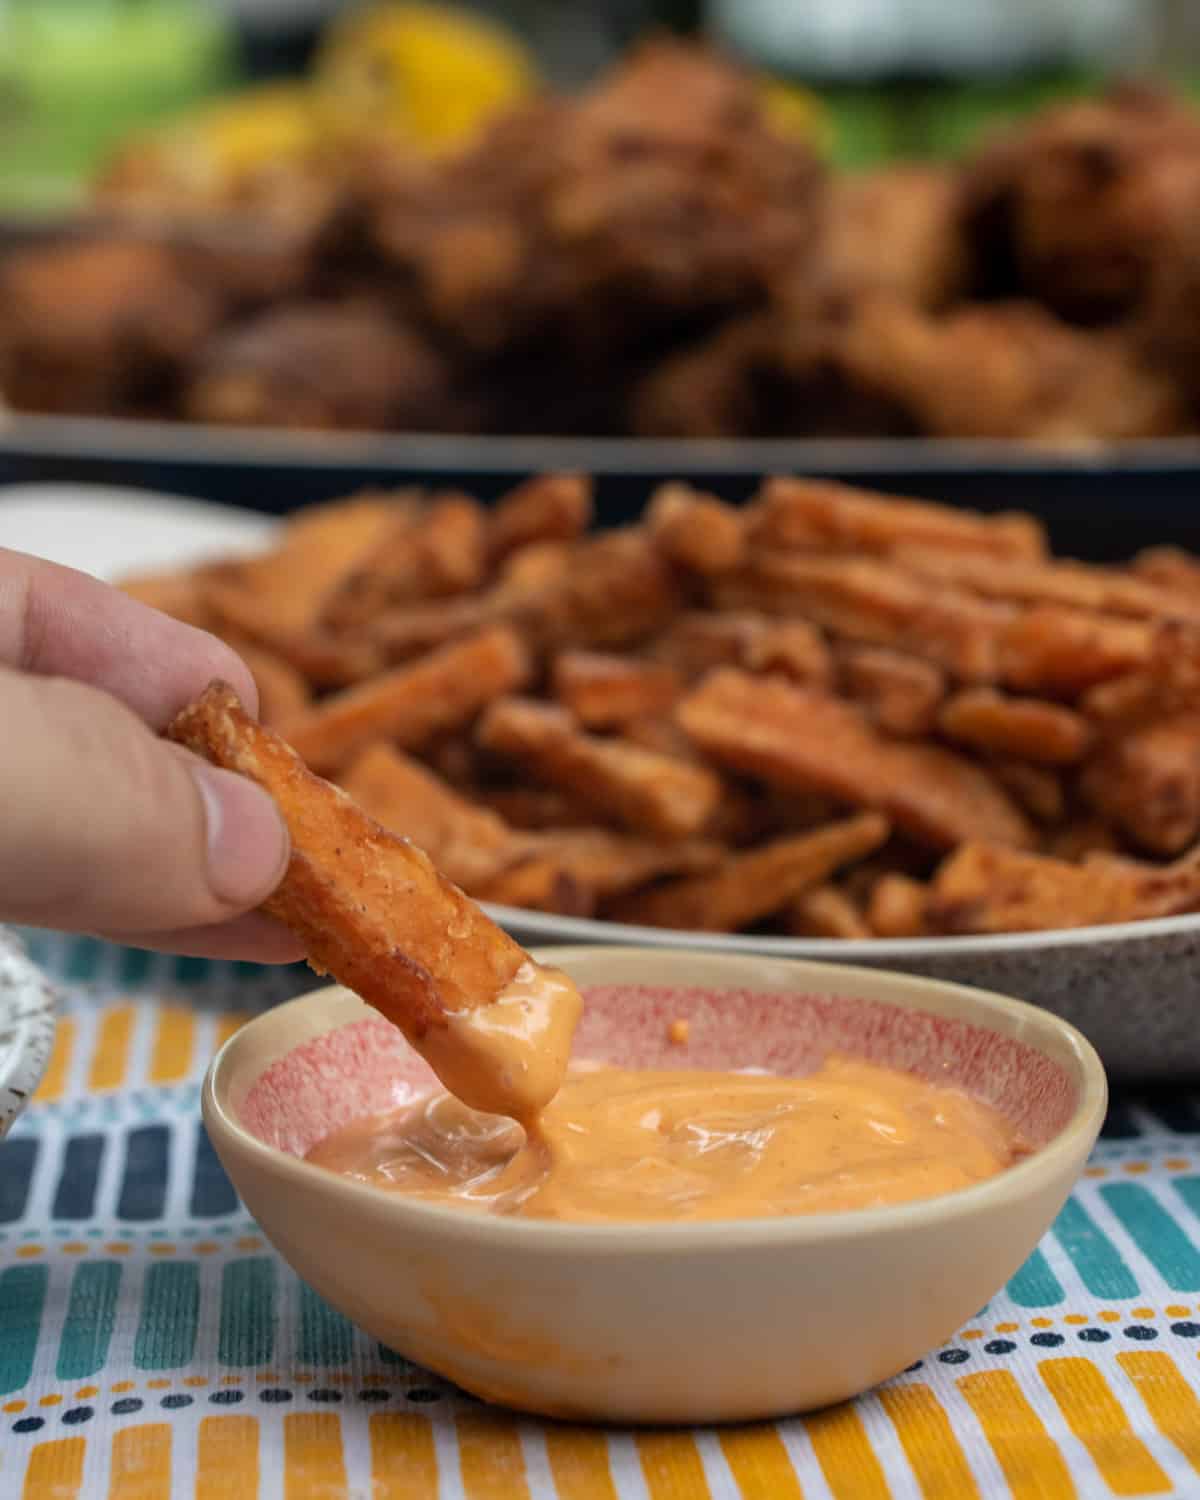 A fry being dipped into a small bowl of spicy ranch.